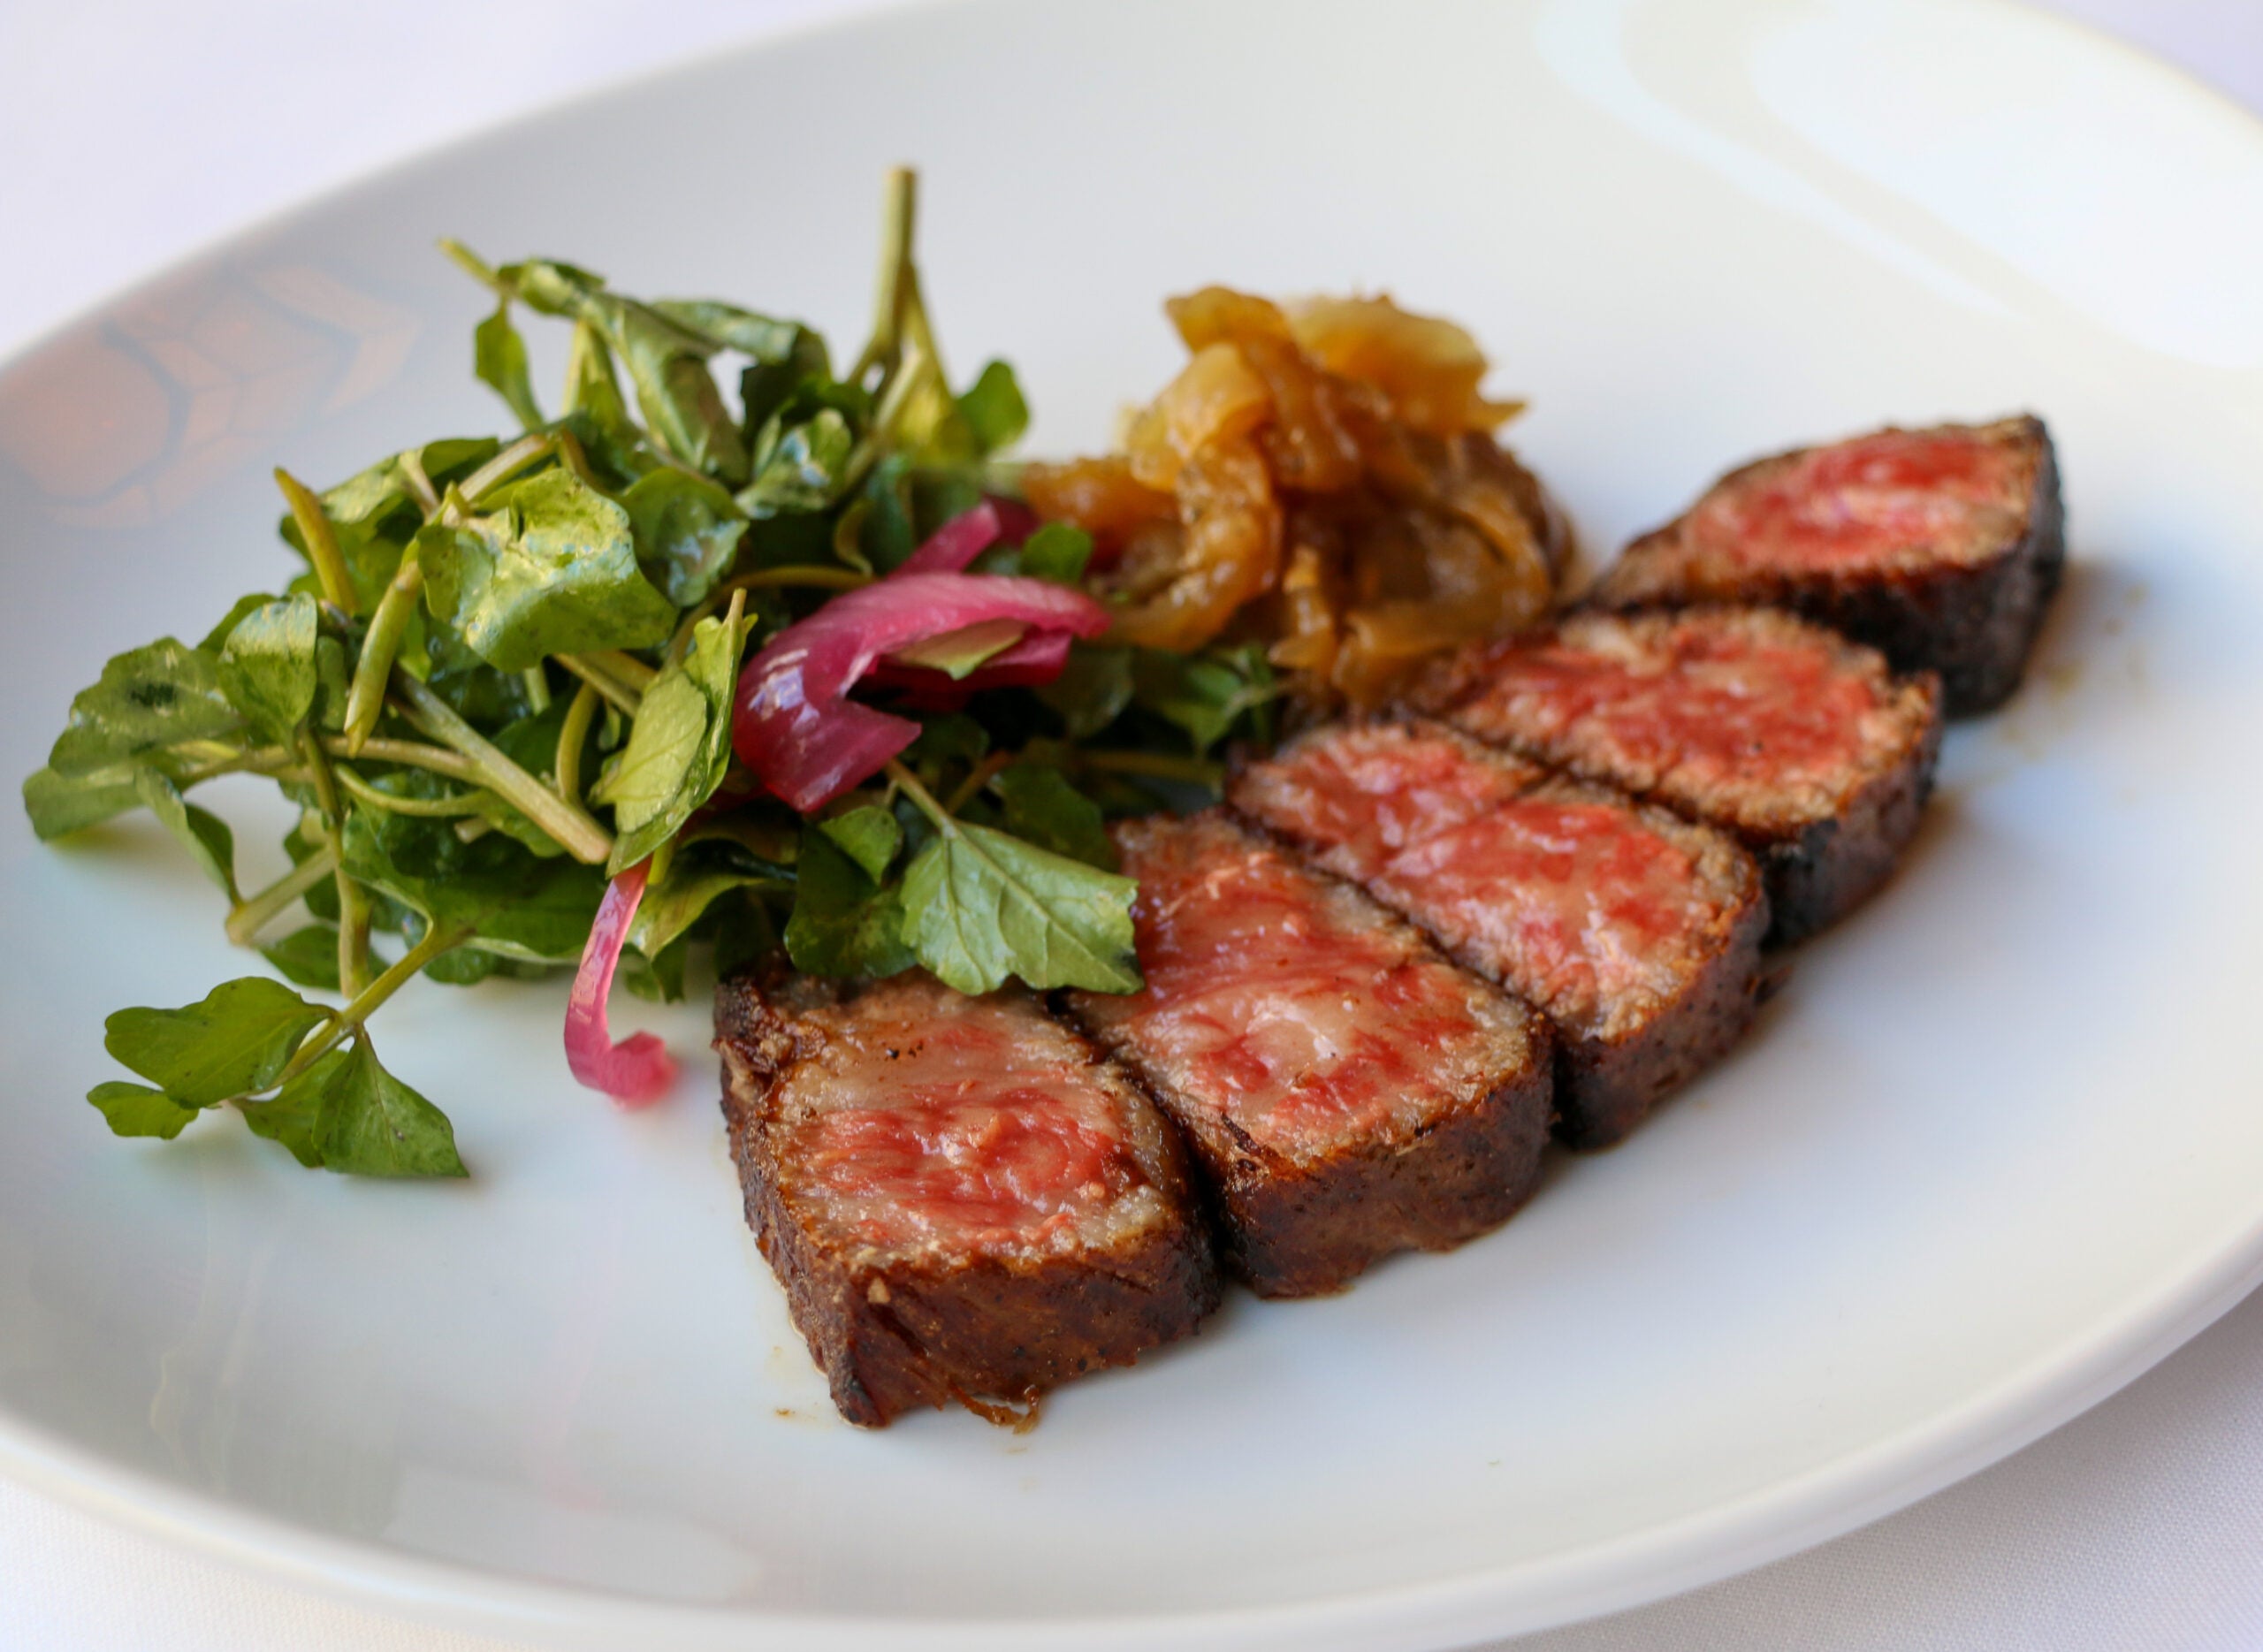 The wagyu striploin at Grill 23.